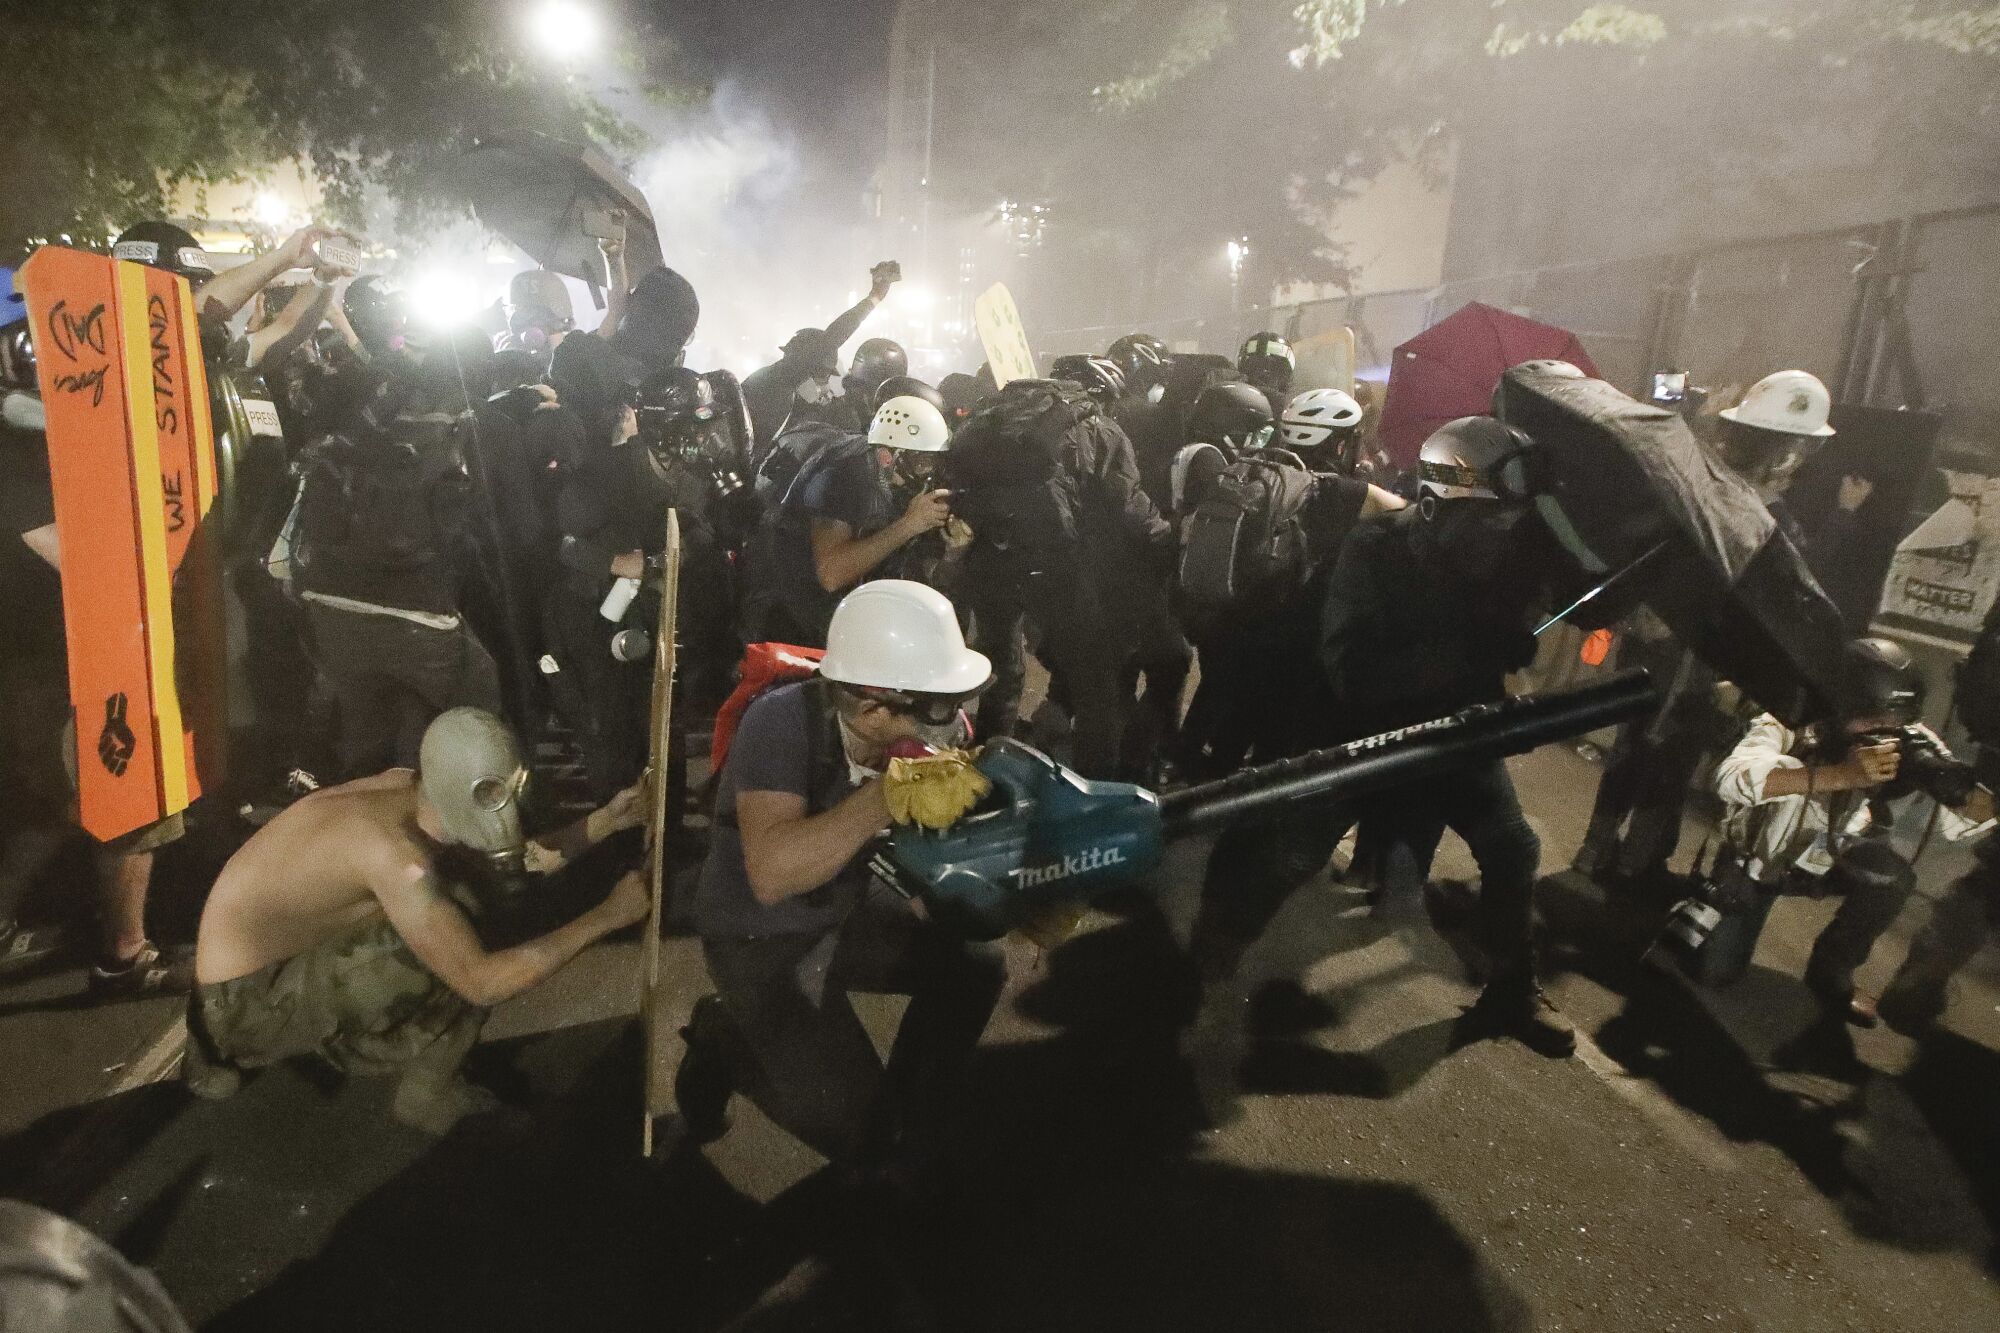 Demonstrators huddle and blow back tear gas with leaf blowers during a clash with federal officers.